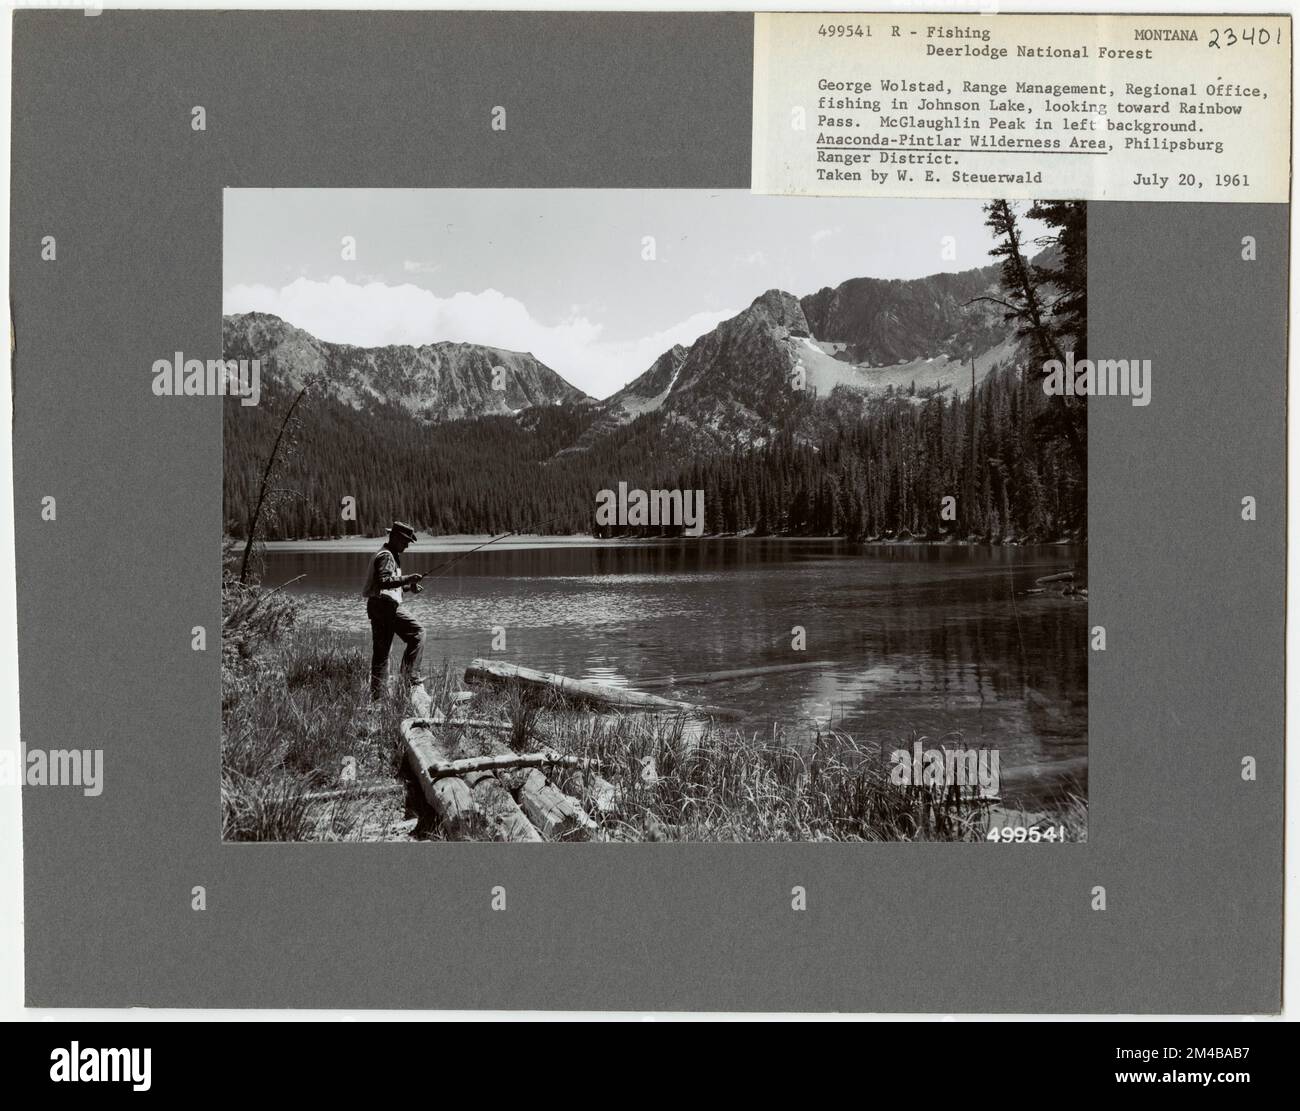 Fishing - Montana. Photographs Relating to National Forests, Resource Management Practices, Personnel, and Cultural and Economic History Stock Photo